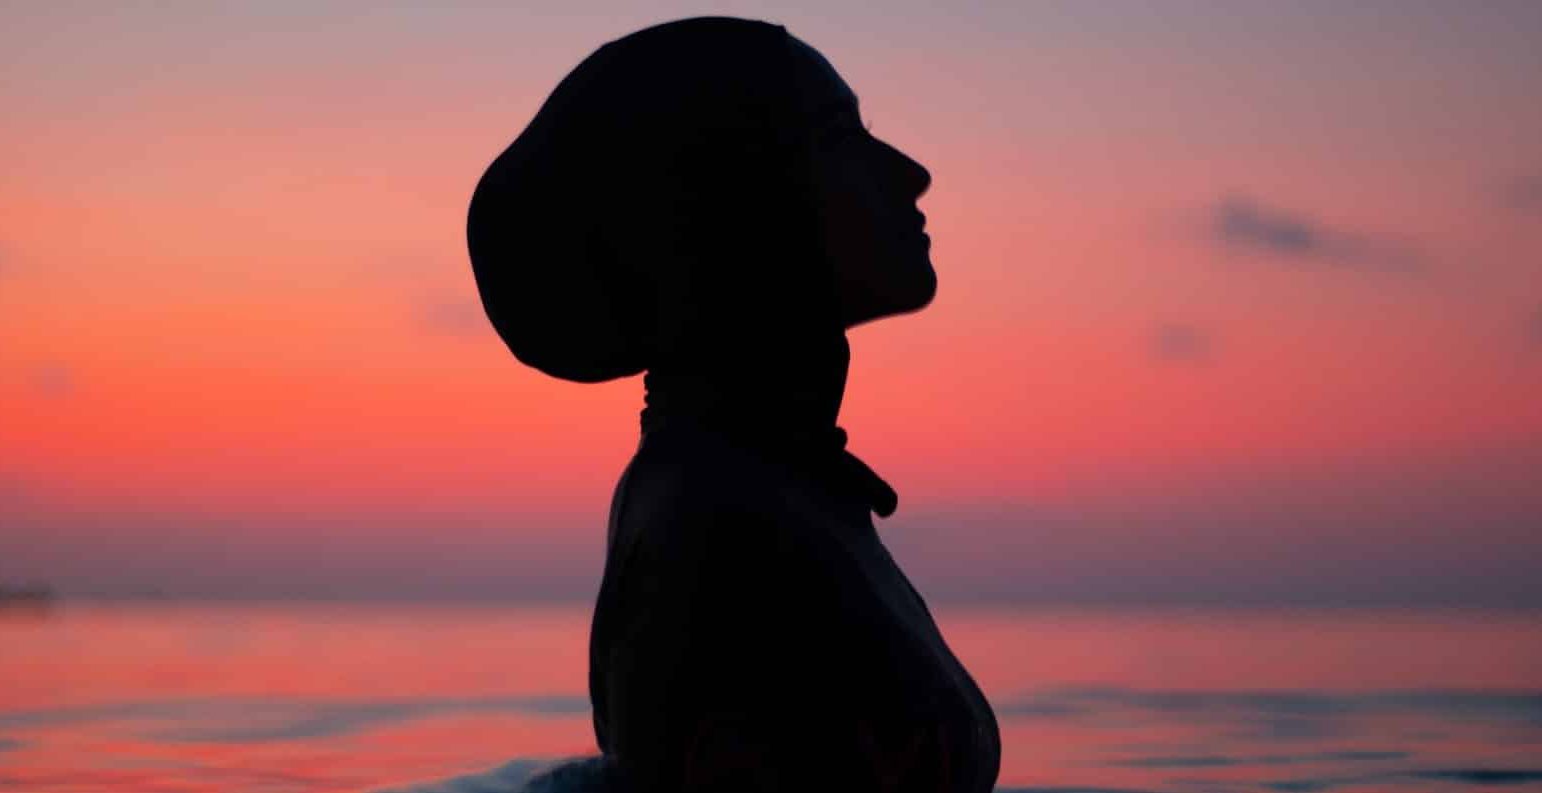 the silhouette of a woman in a headscarf in chest-height water in front of a sunset